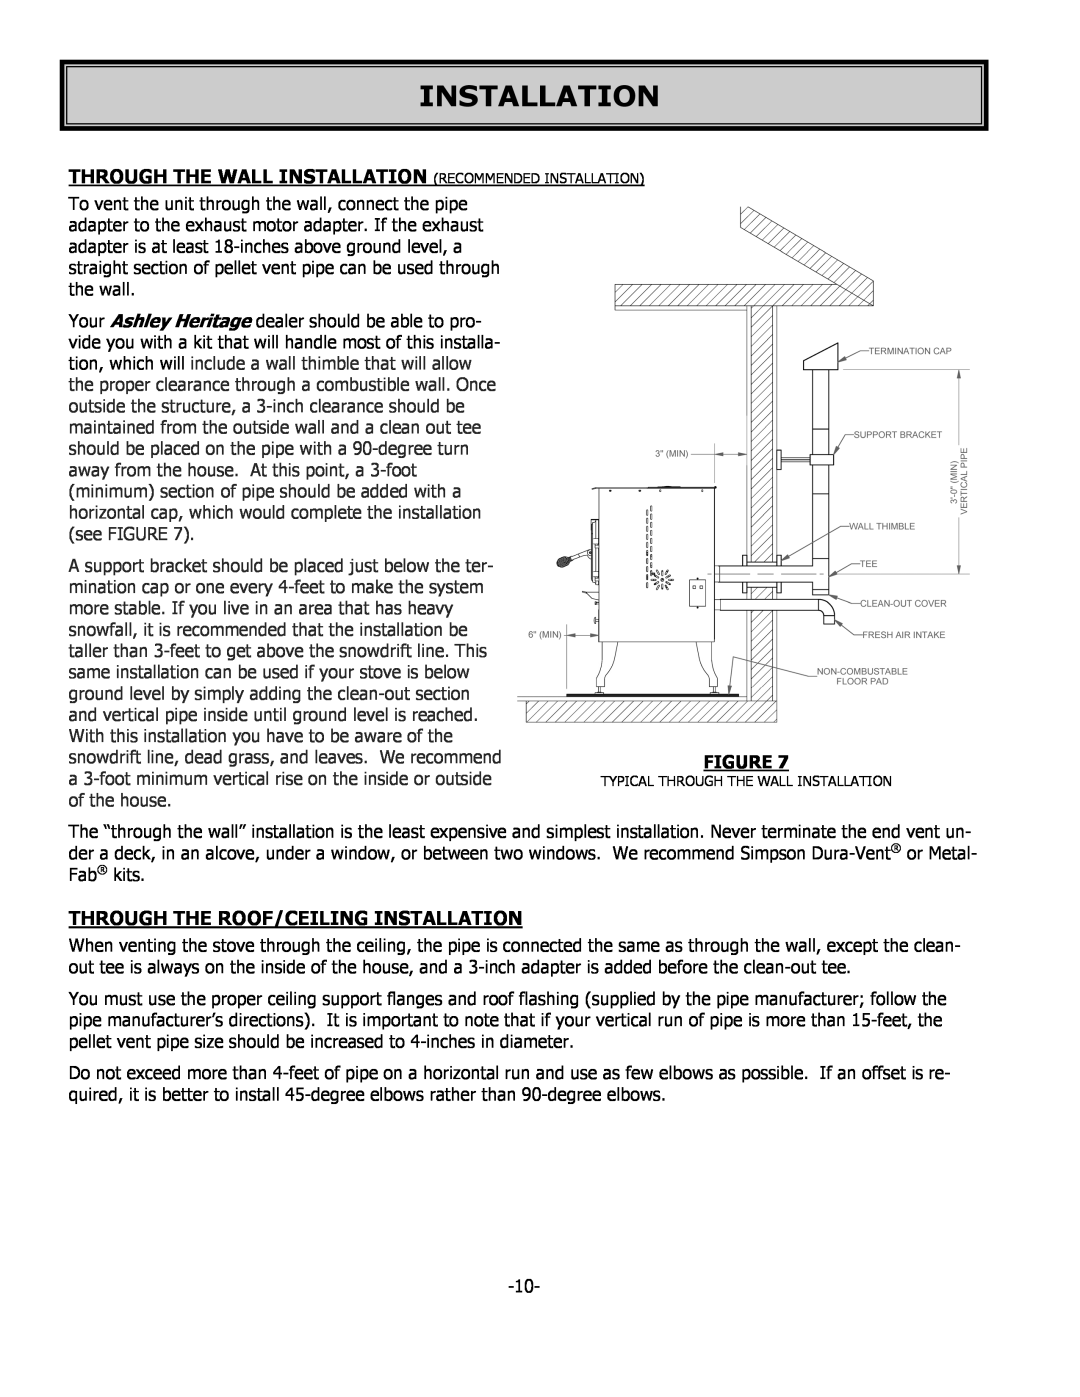 United States Stove 5700 owner manual Through The Roof/Ceiling Installation 